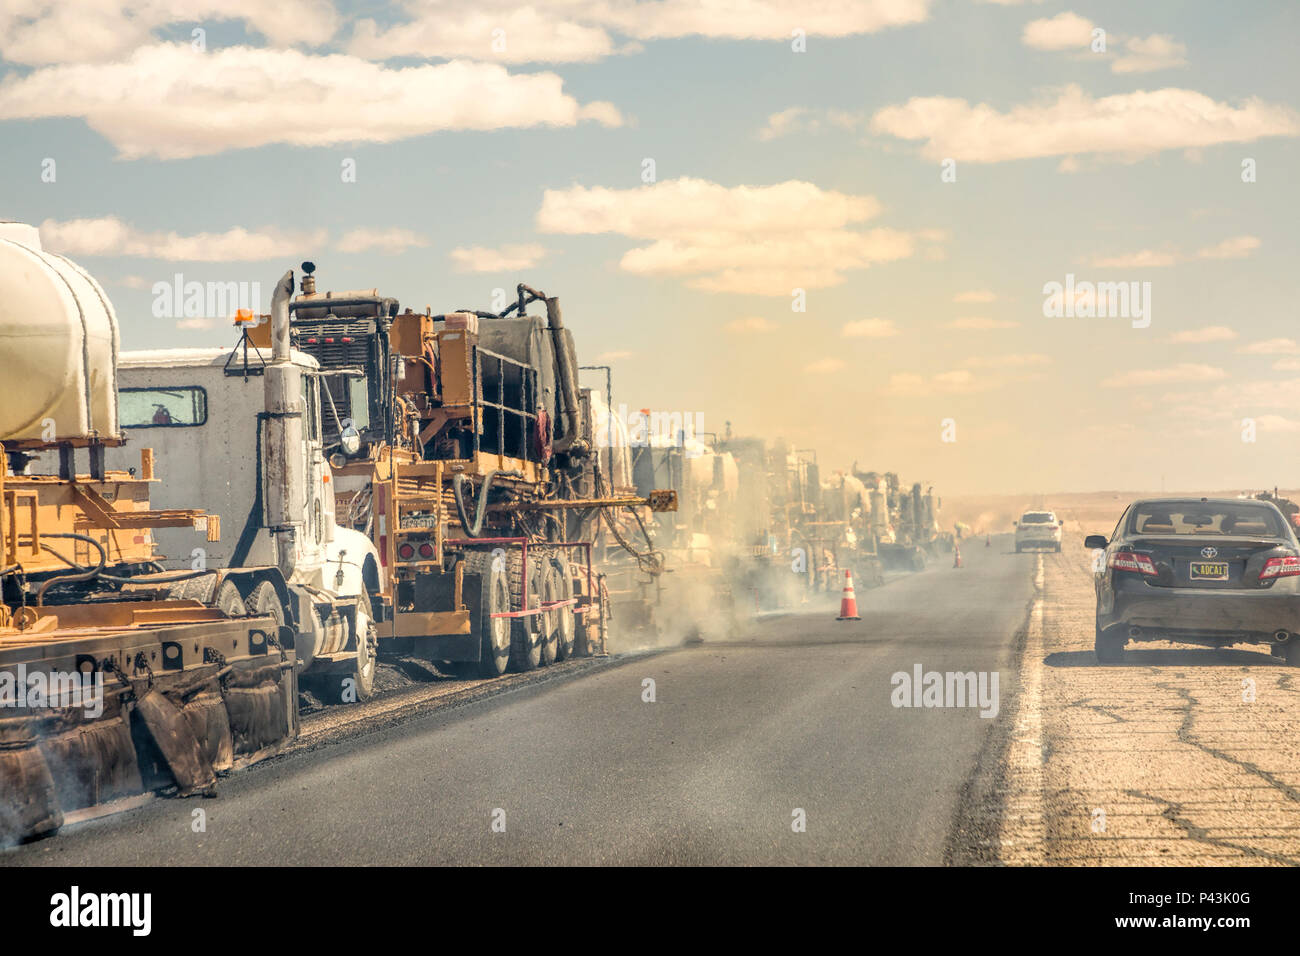 Road resurfacing with heat and air pollution obscuring vision for drivers, New Mexico, USA Stock Photo